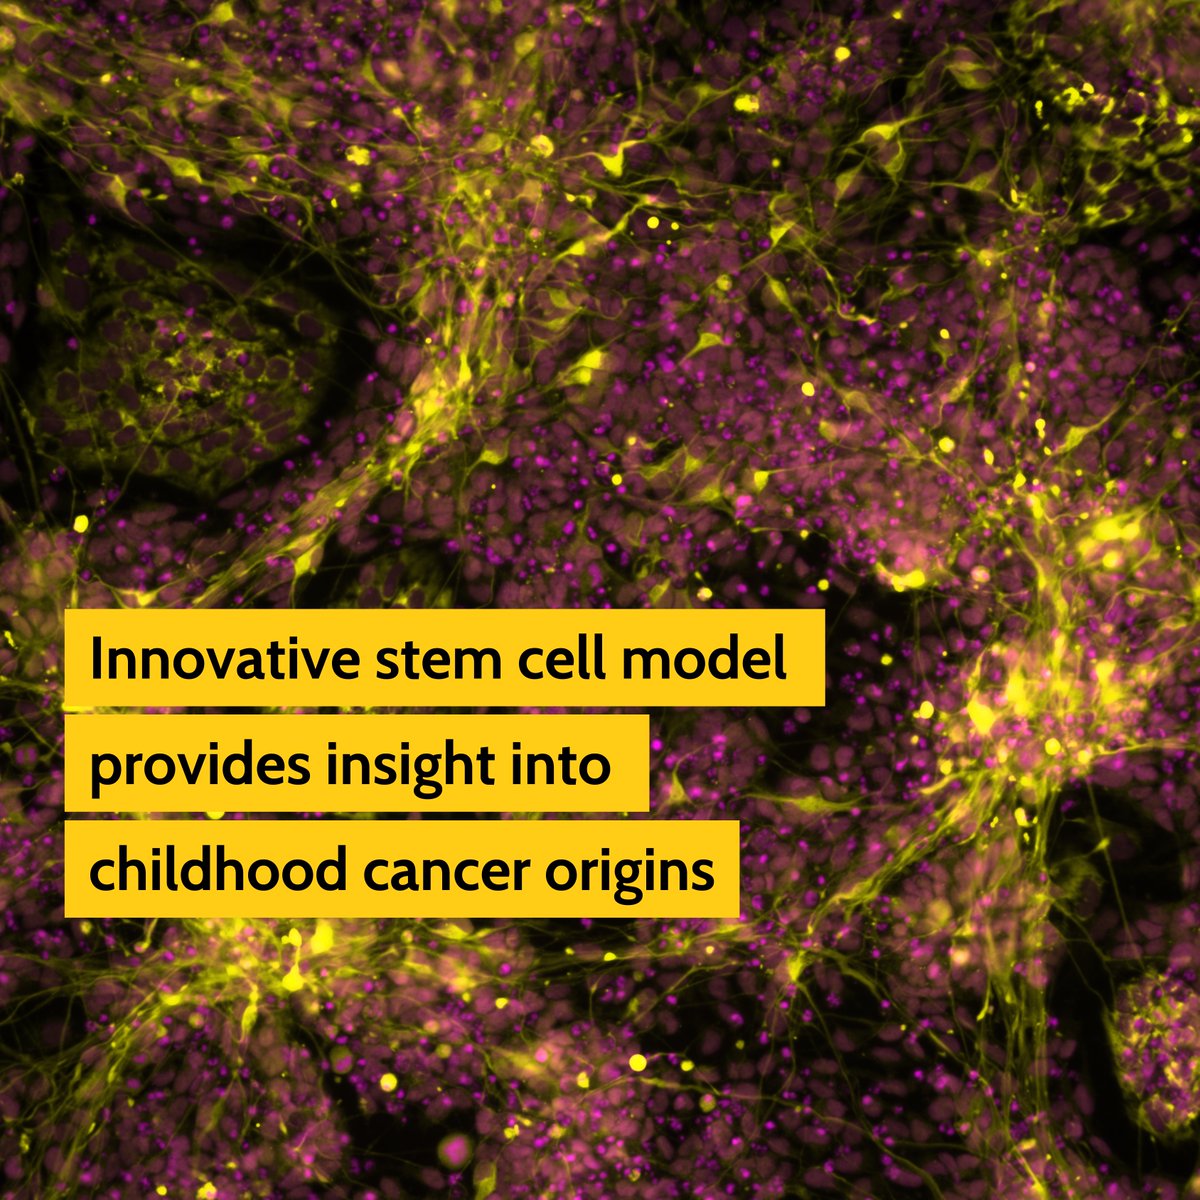 🧬 Groundbreaking research from @sheffielduni & @StAnna_CCRI unveils a new model illuminating the origins of neuroblastoma, a cancer impacting infants. Published in Nature Communications, it reveals key genetic pathways fueling this disease.📸© Dr. Ingrid Saldana